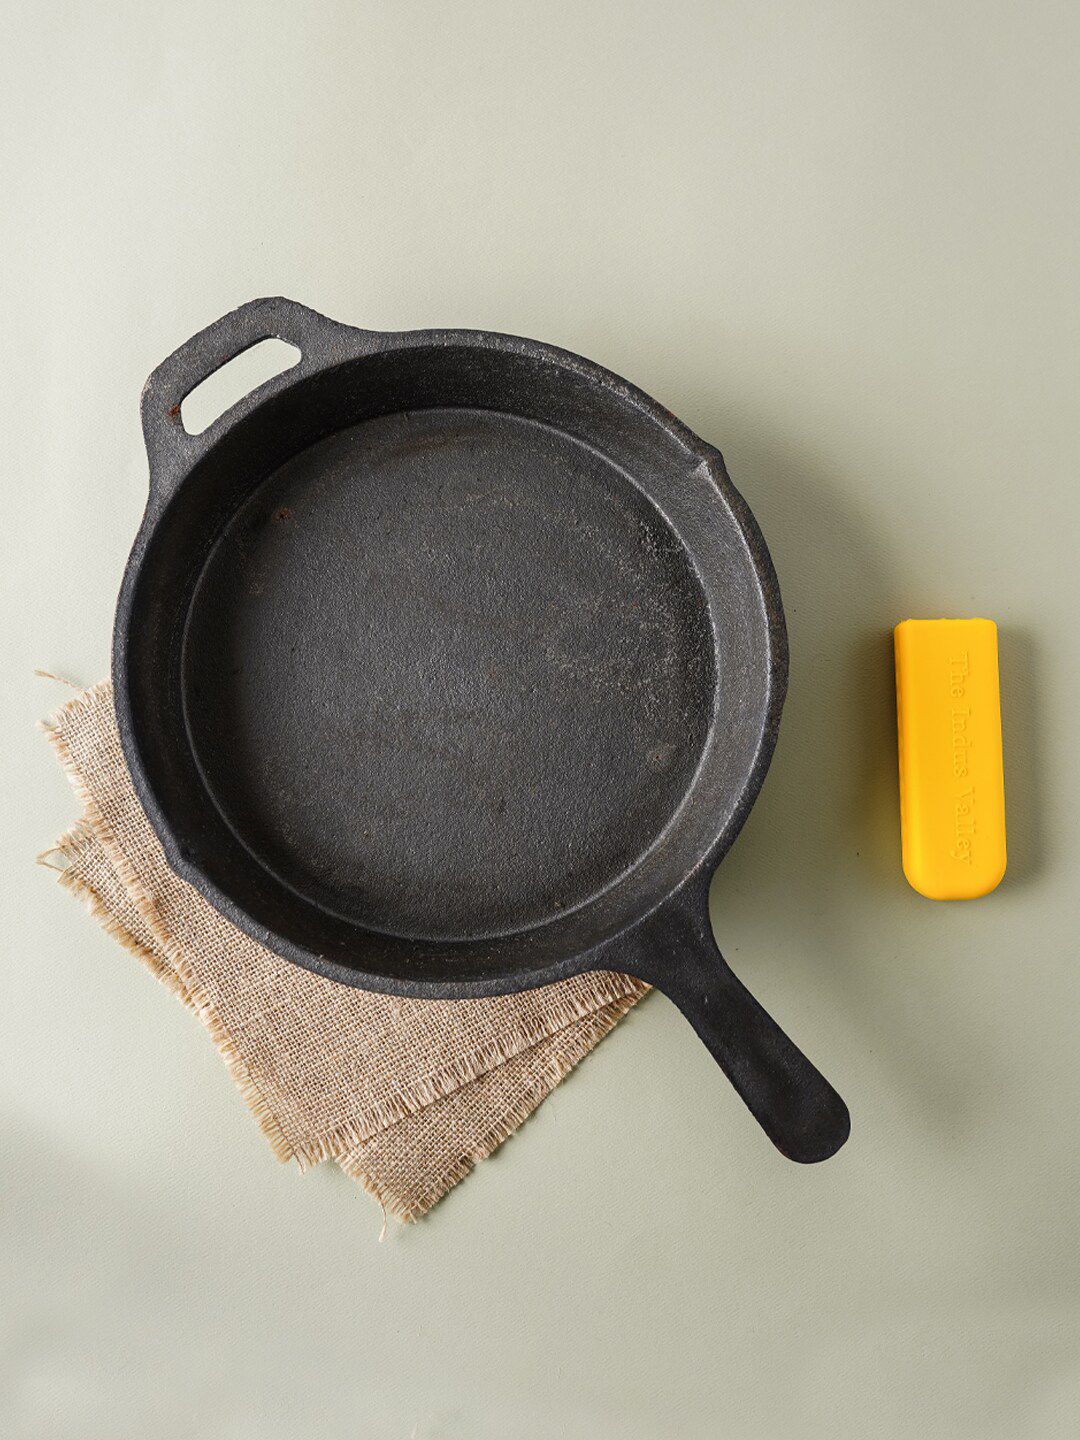 The Indus Valley Black Pre-Seasoned Cast Iron Silicone Handle Skillet - 1.5L Price in India